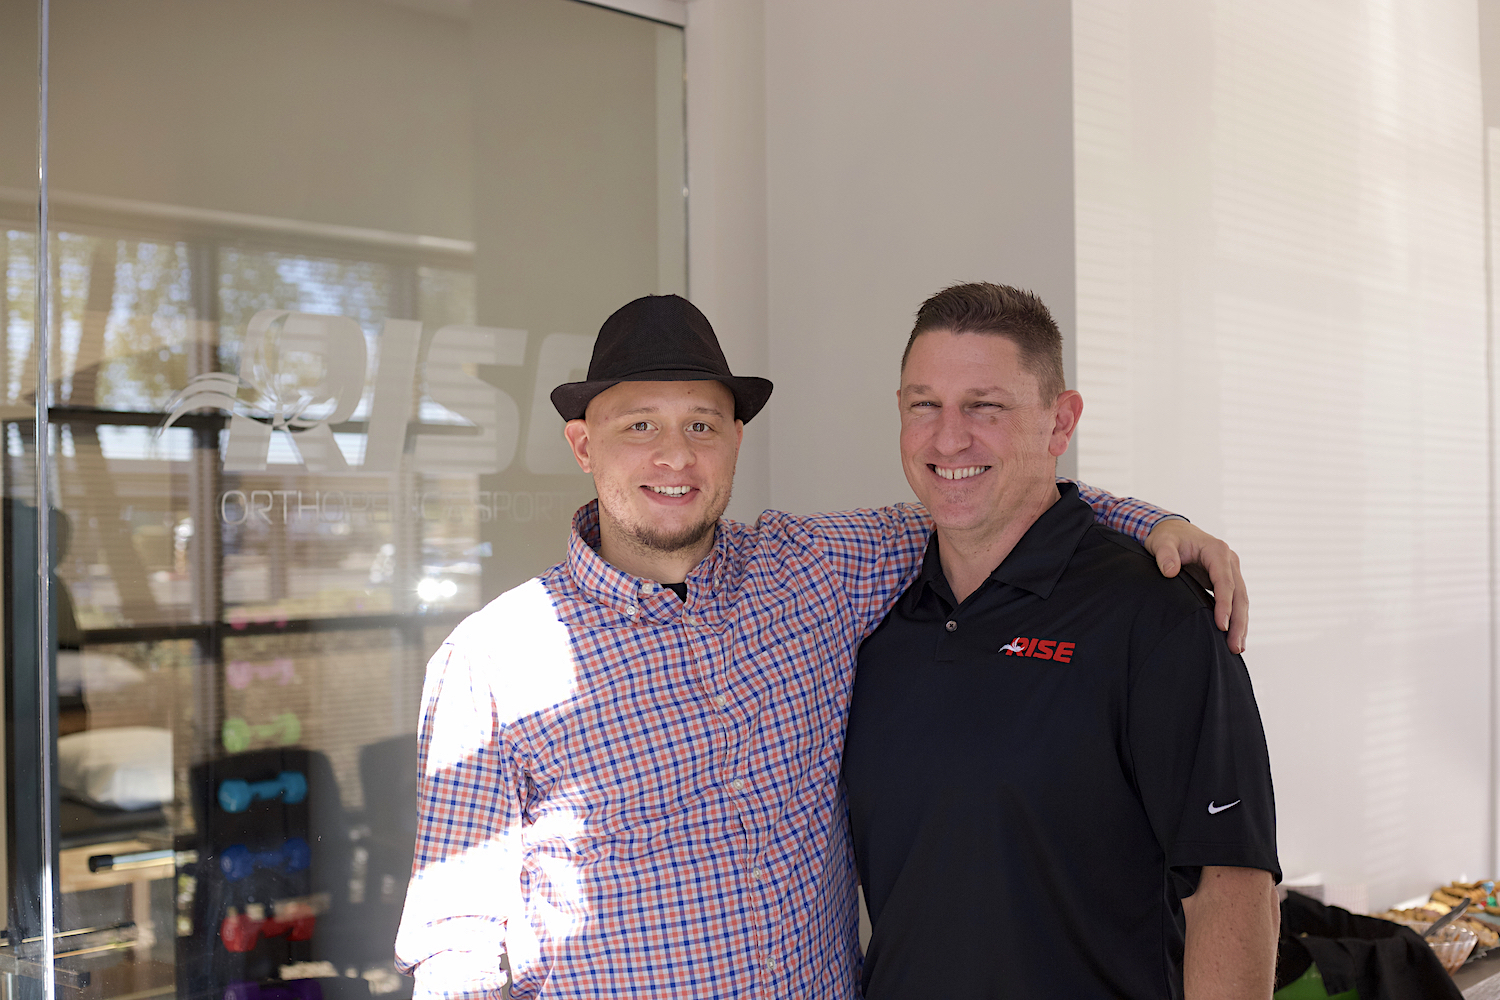 brand-development-services-in-west-phoenix-during-launch-of-rise-orthopedic-and-sports-pt-in-surprise-az-picture-of-jordan-trask-with-client-and-owner-mark-jagodzinski